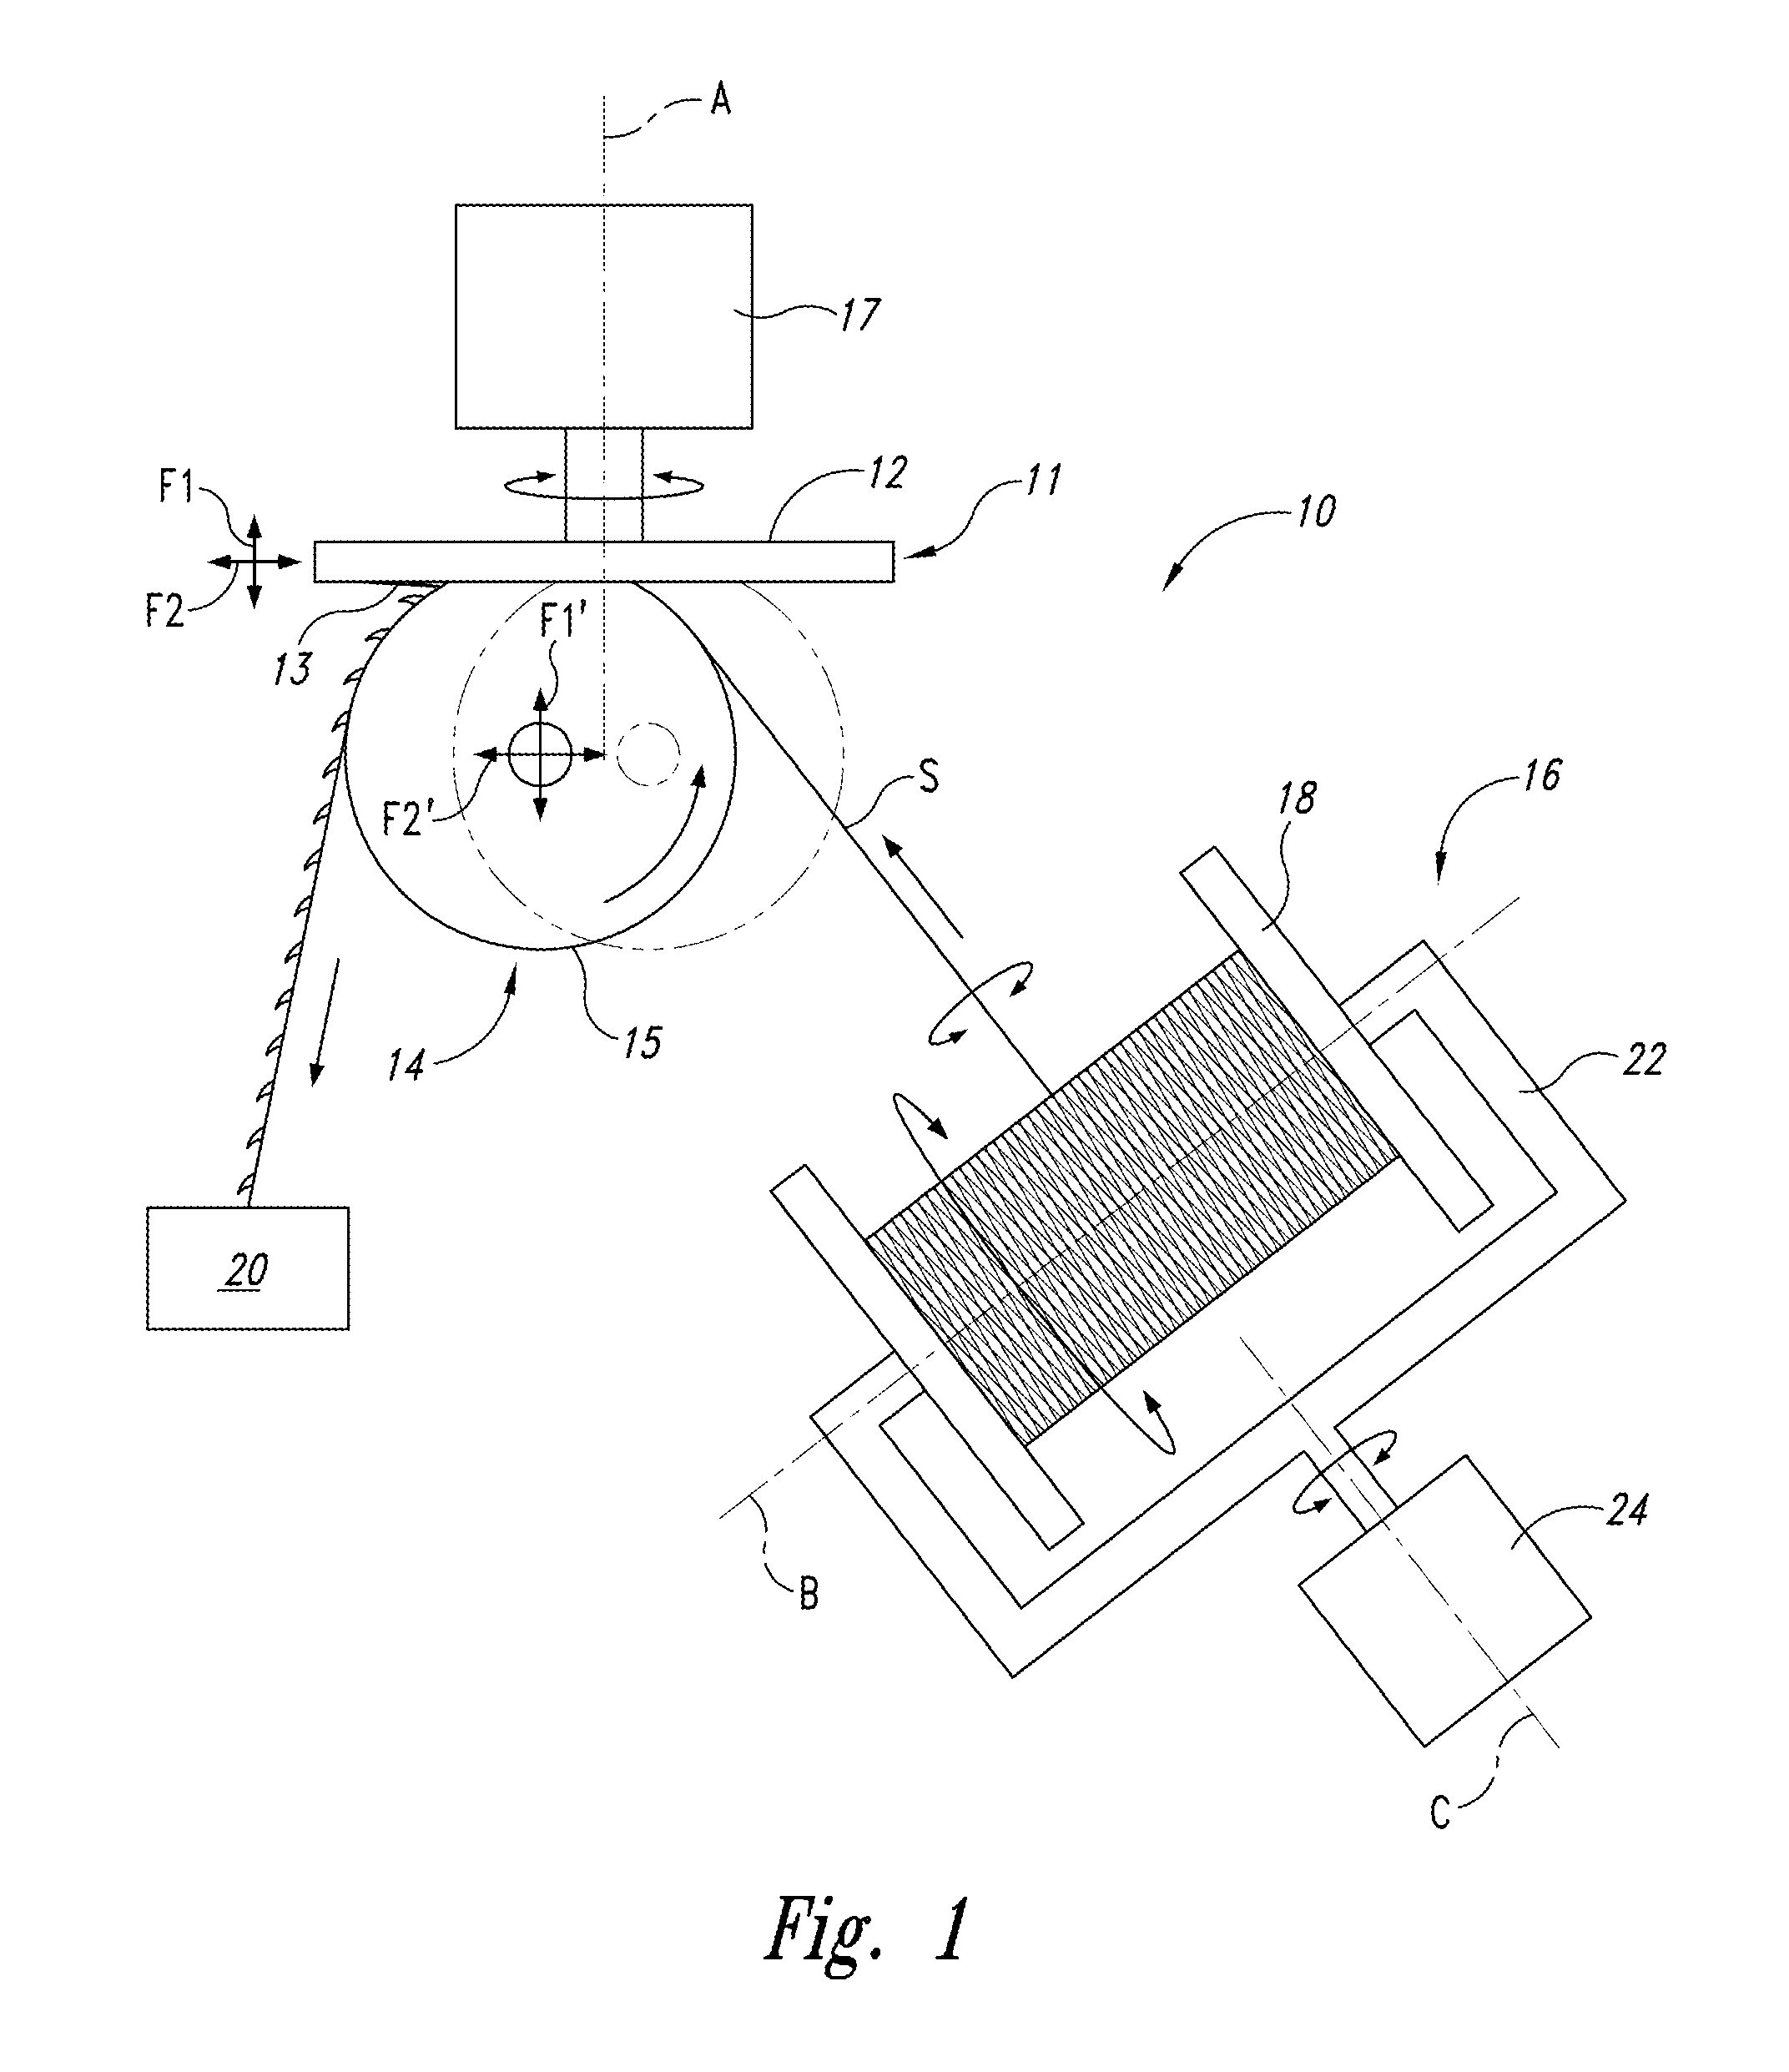 Apparatus and method for forming self-retaining sutures